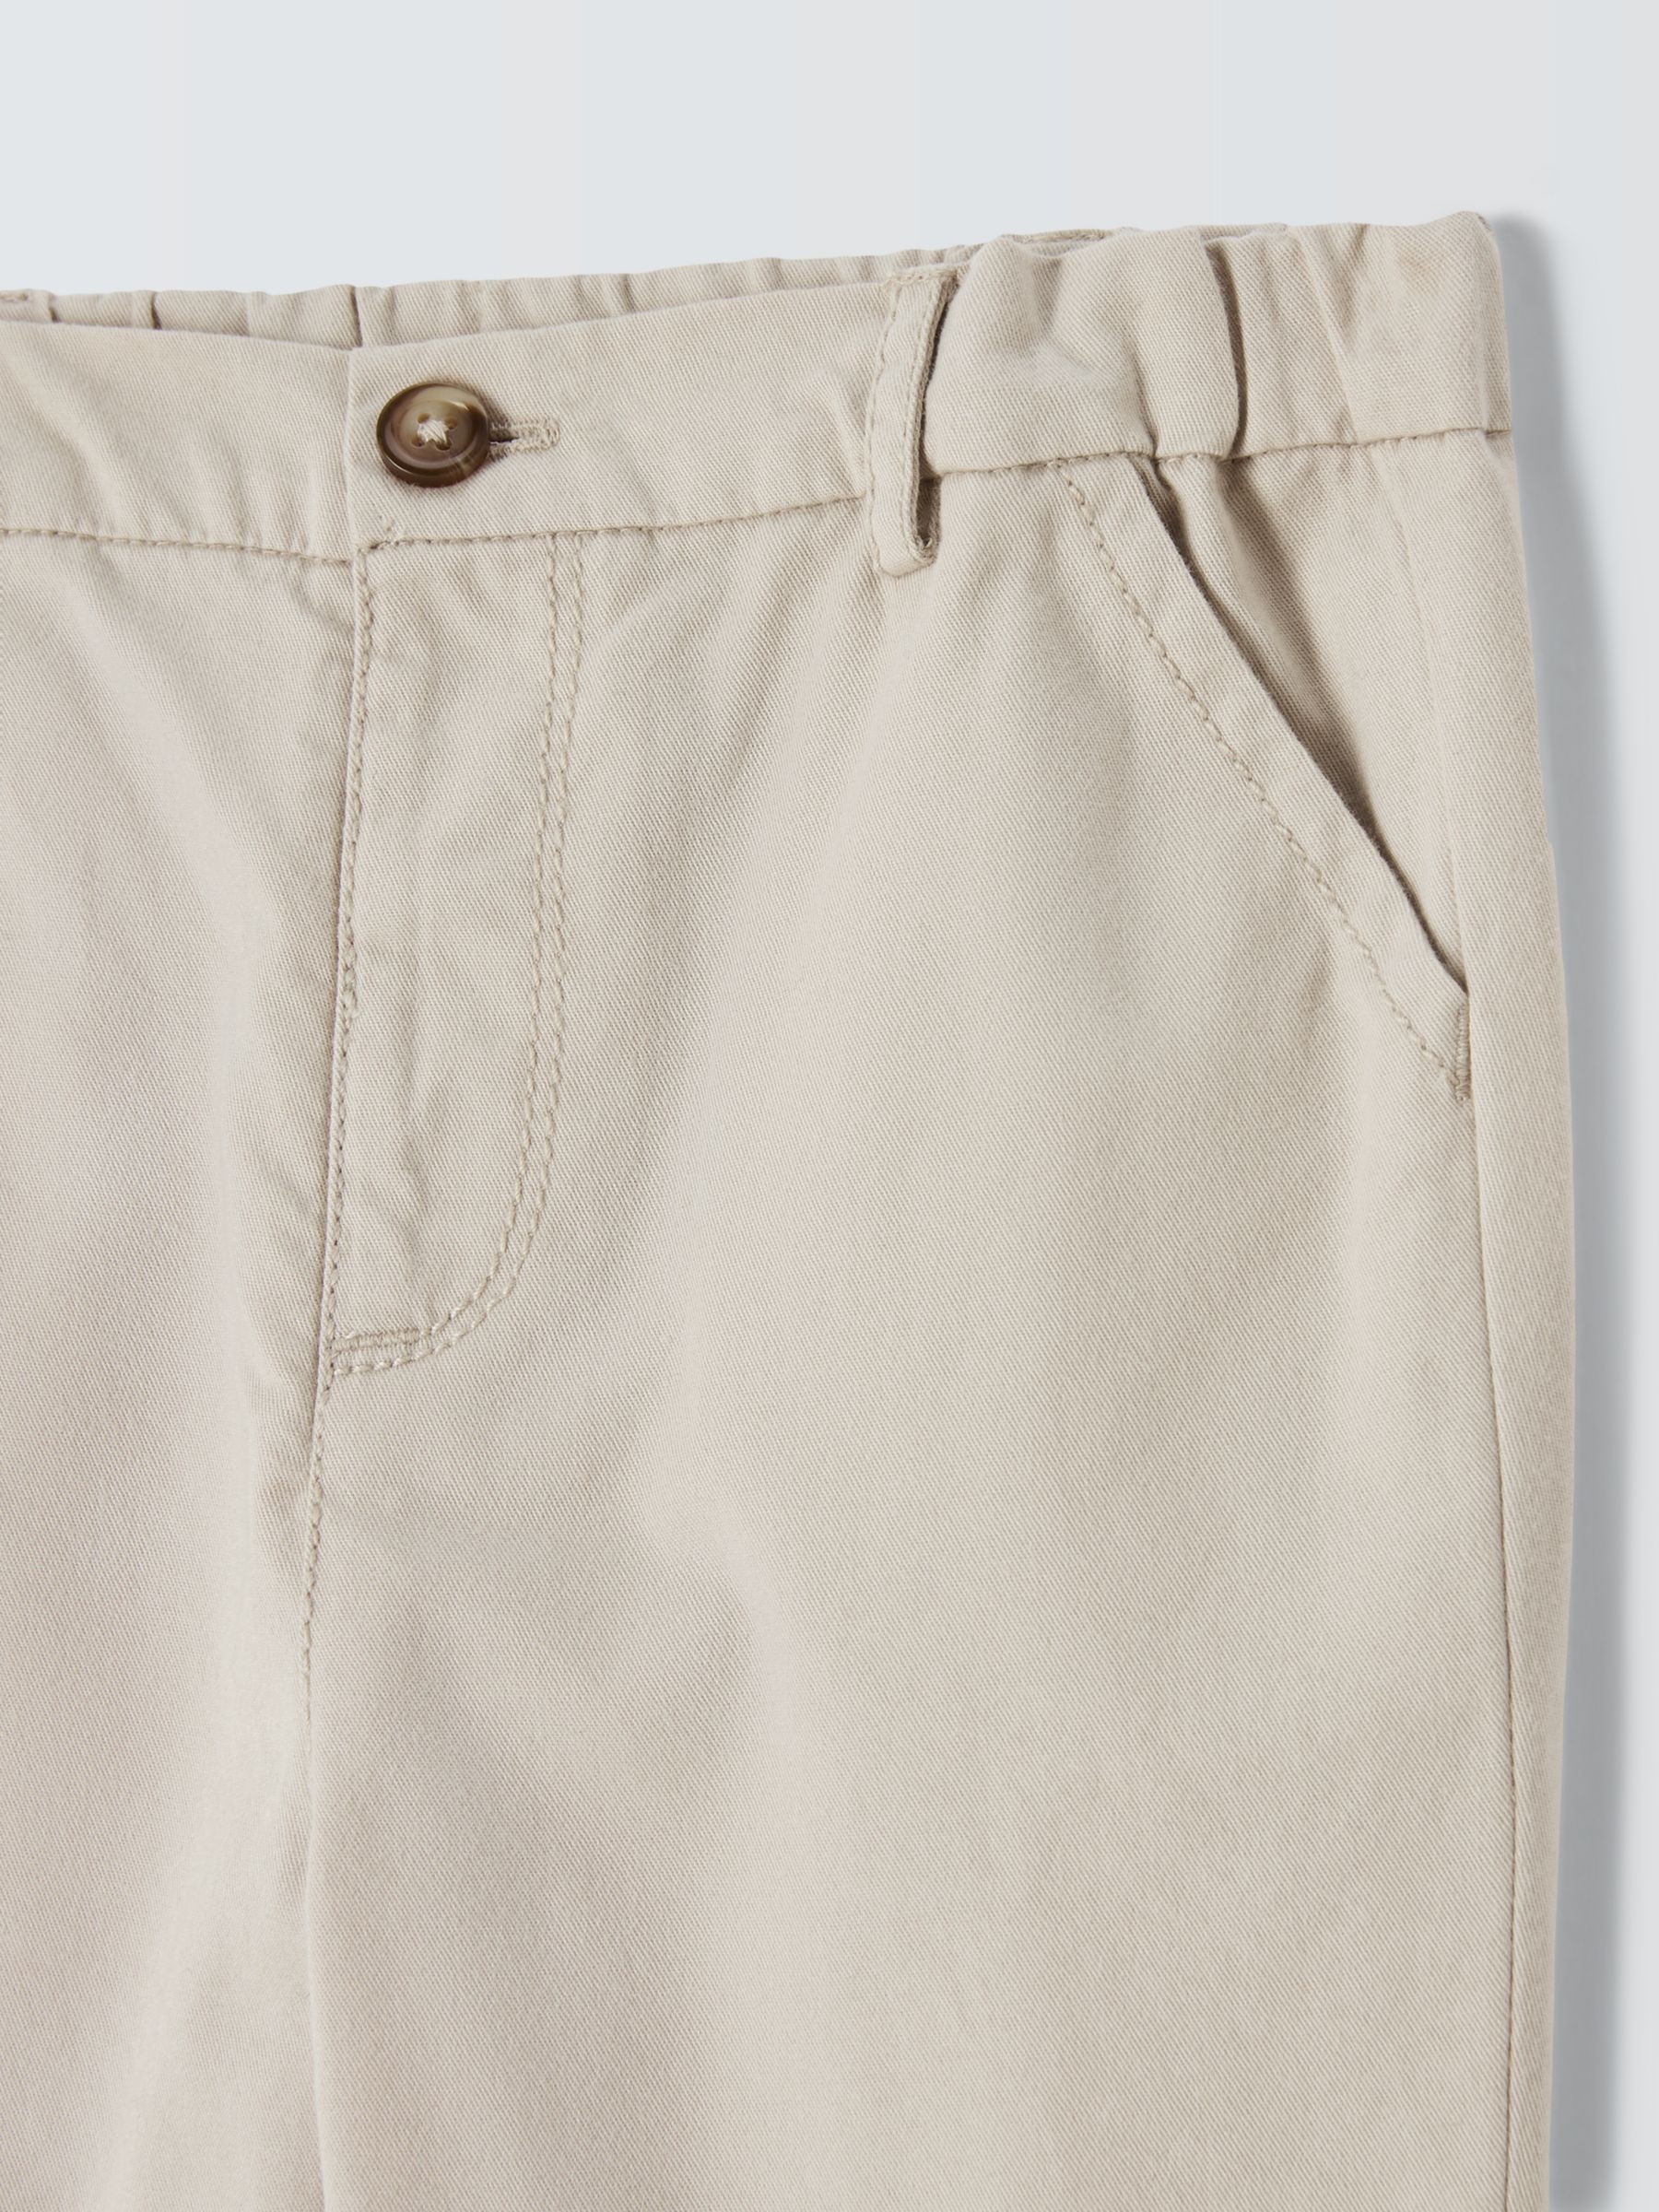 John Lewis Heirloom Collection Baby Straight Leg Chinos, Natrural, 0-3 months